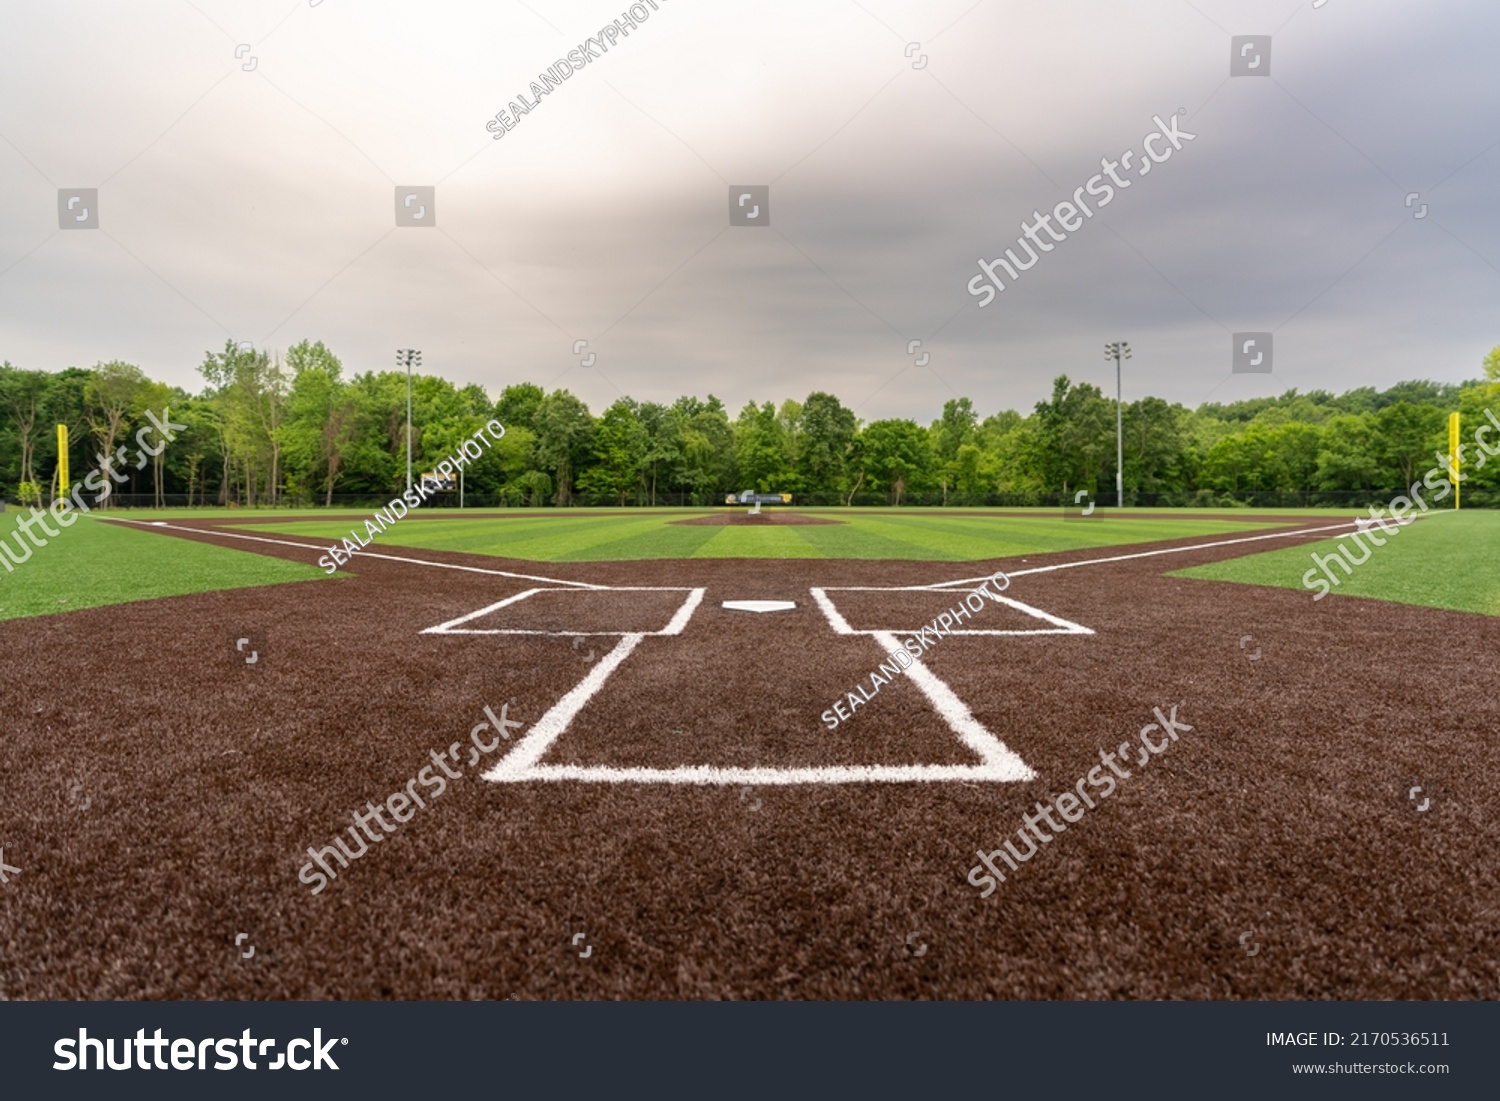 View of  high school synthetic turf baseball field looking from batters box toward the outfield. #2170536511